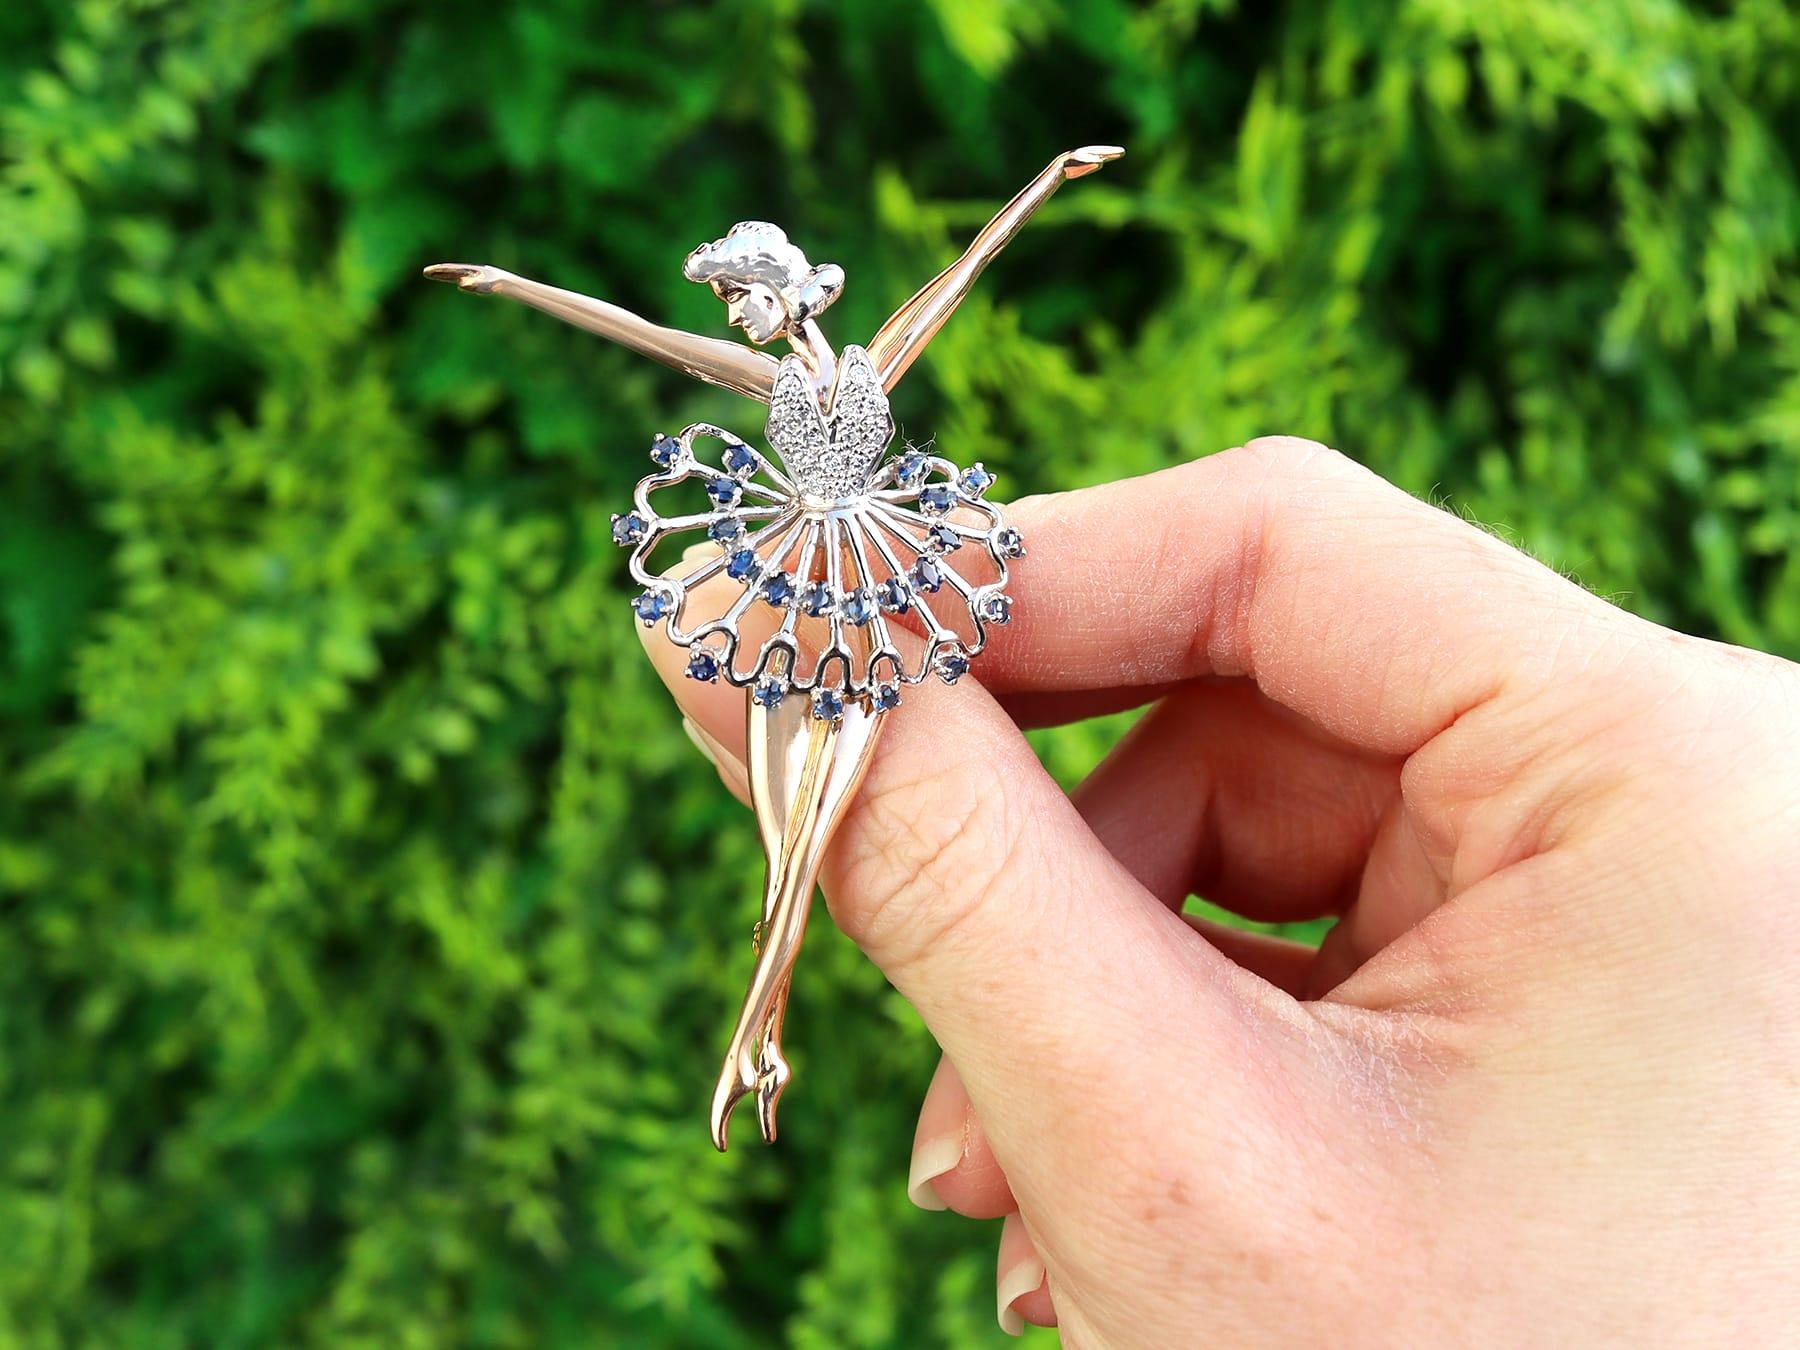 An impressive vintage 0.75 carat sapphire and 0.22 carat diamond, 18 karat yellow and white gold 'ballerina' brooch; part of our diverse antique jewelry and estate jewelry collections.

This fine and impressive vintage diamond brooch has been